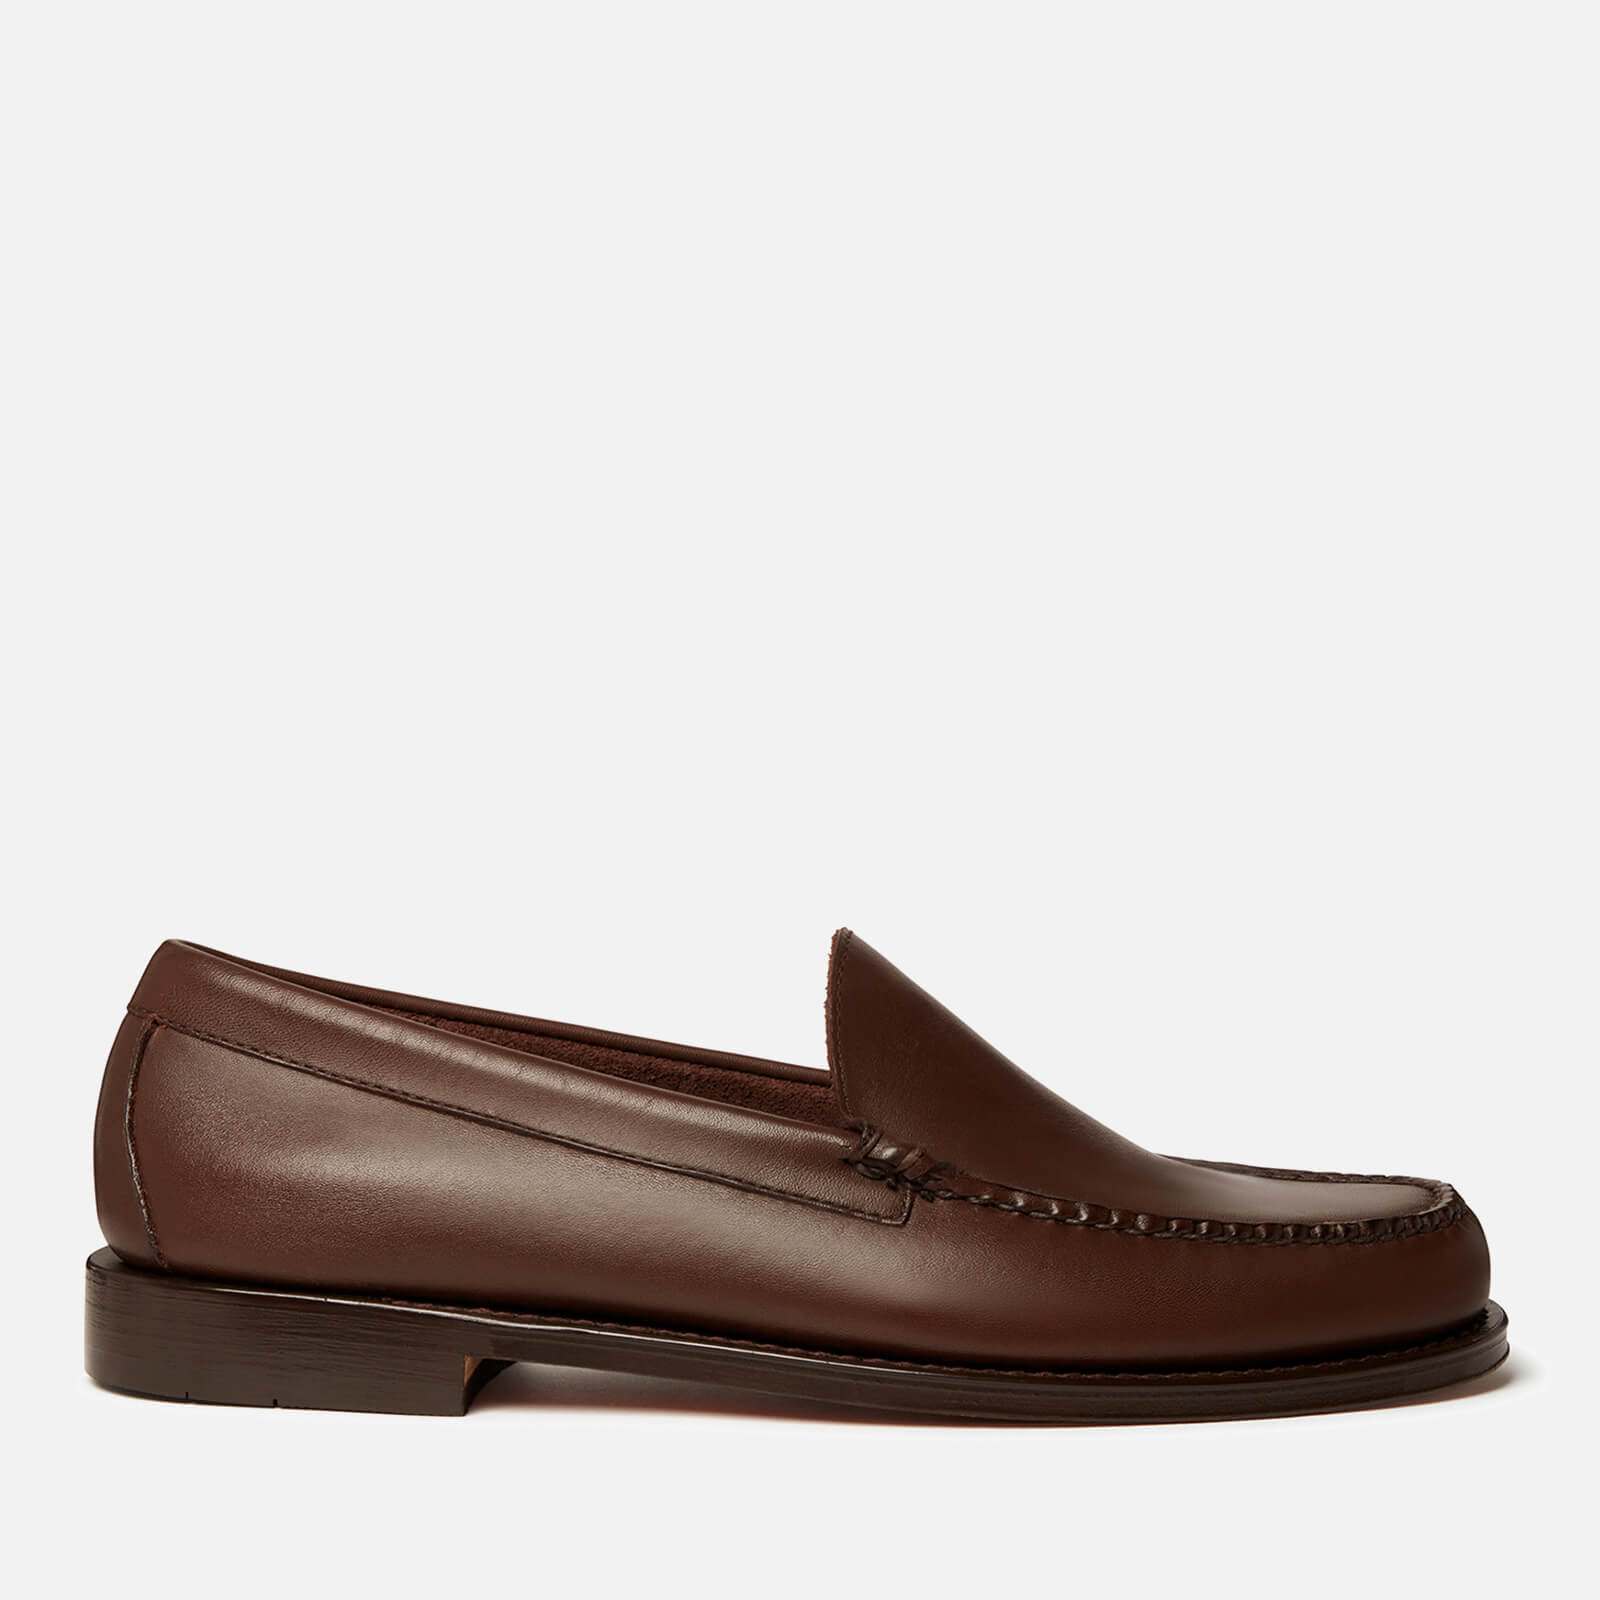 G.H Bass Men's Venetian Leather Loafers